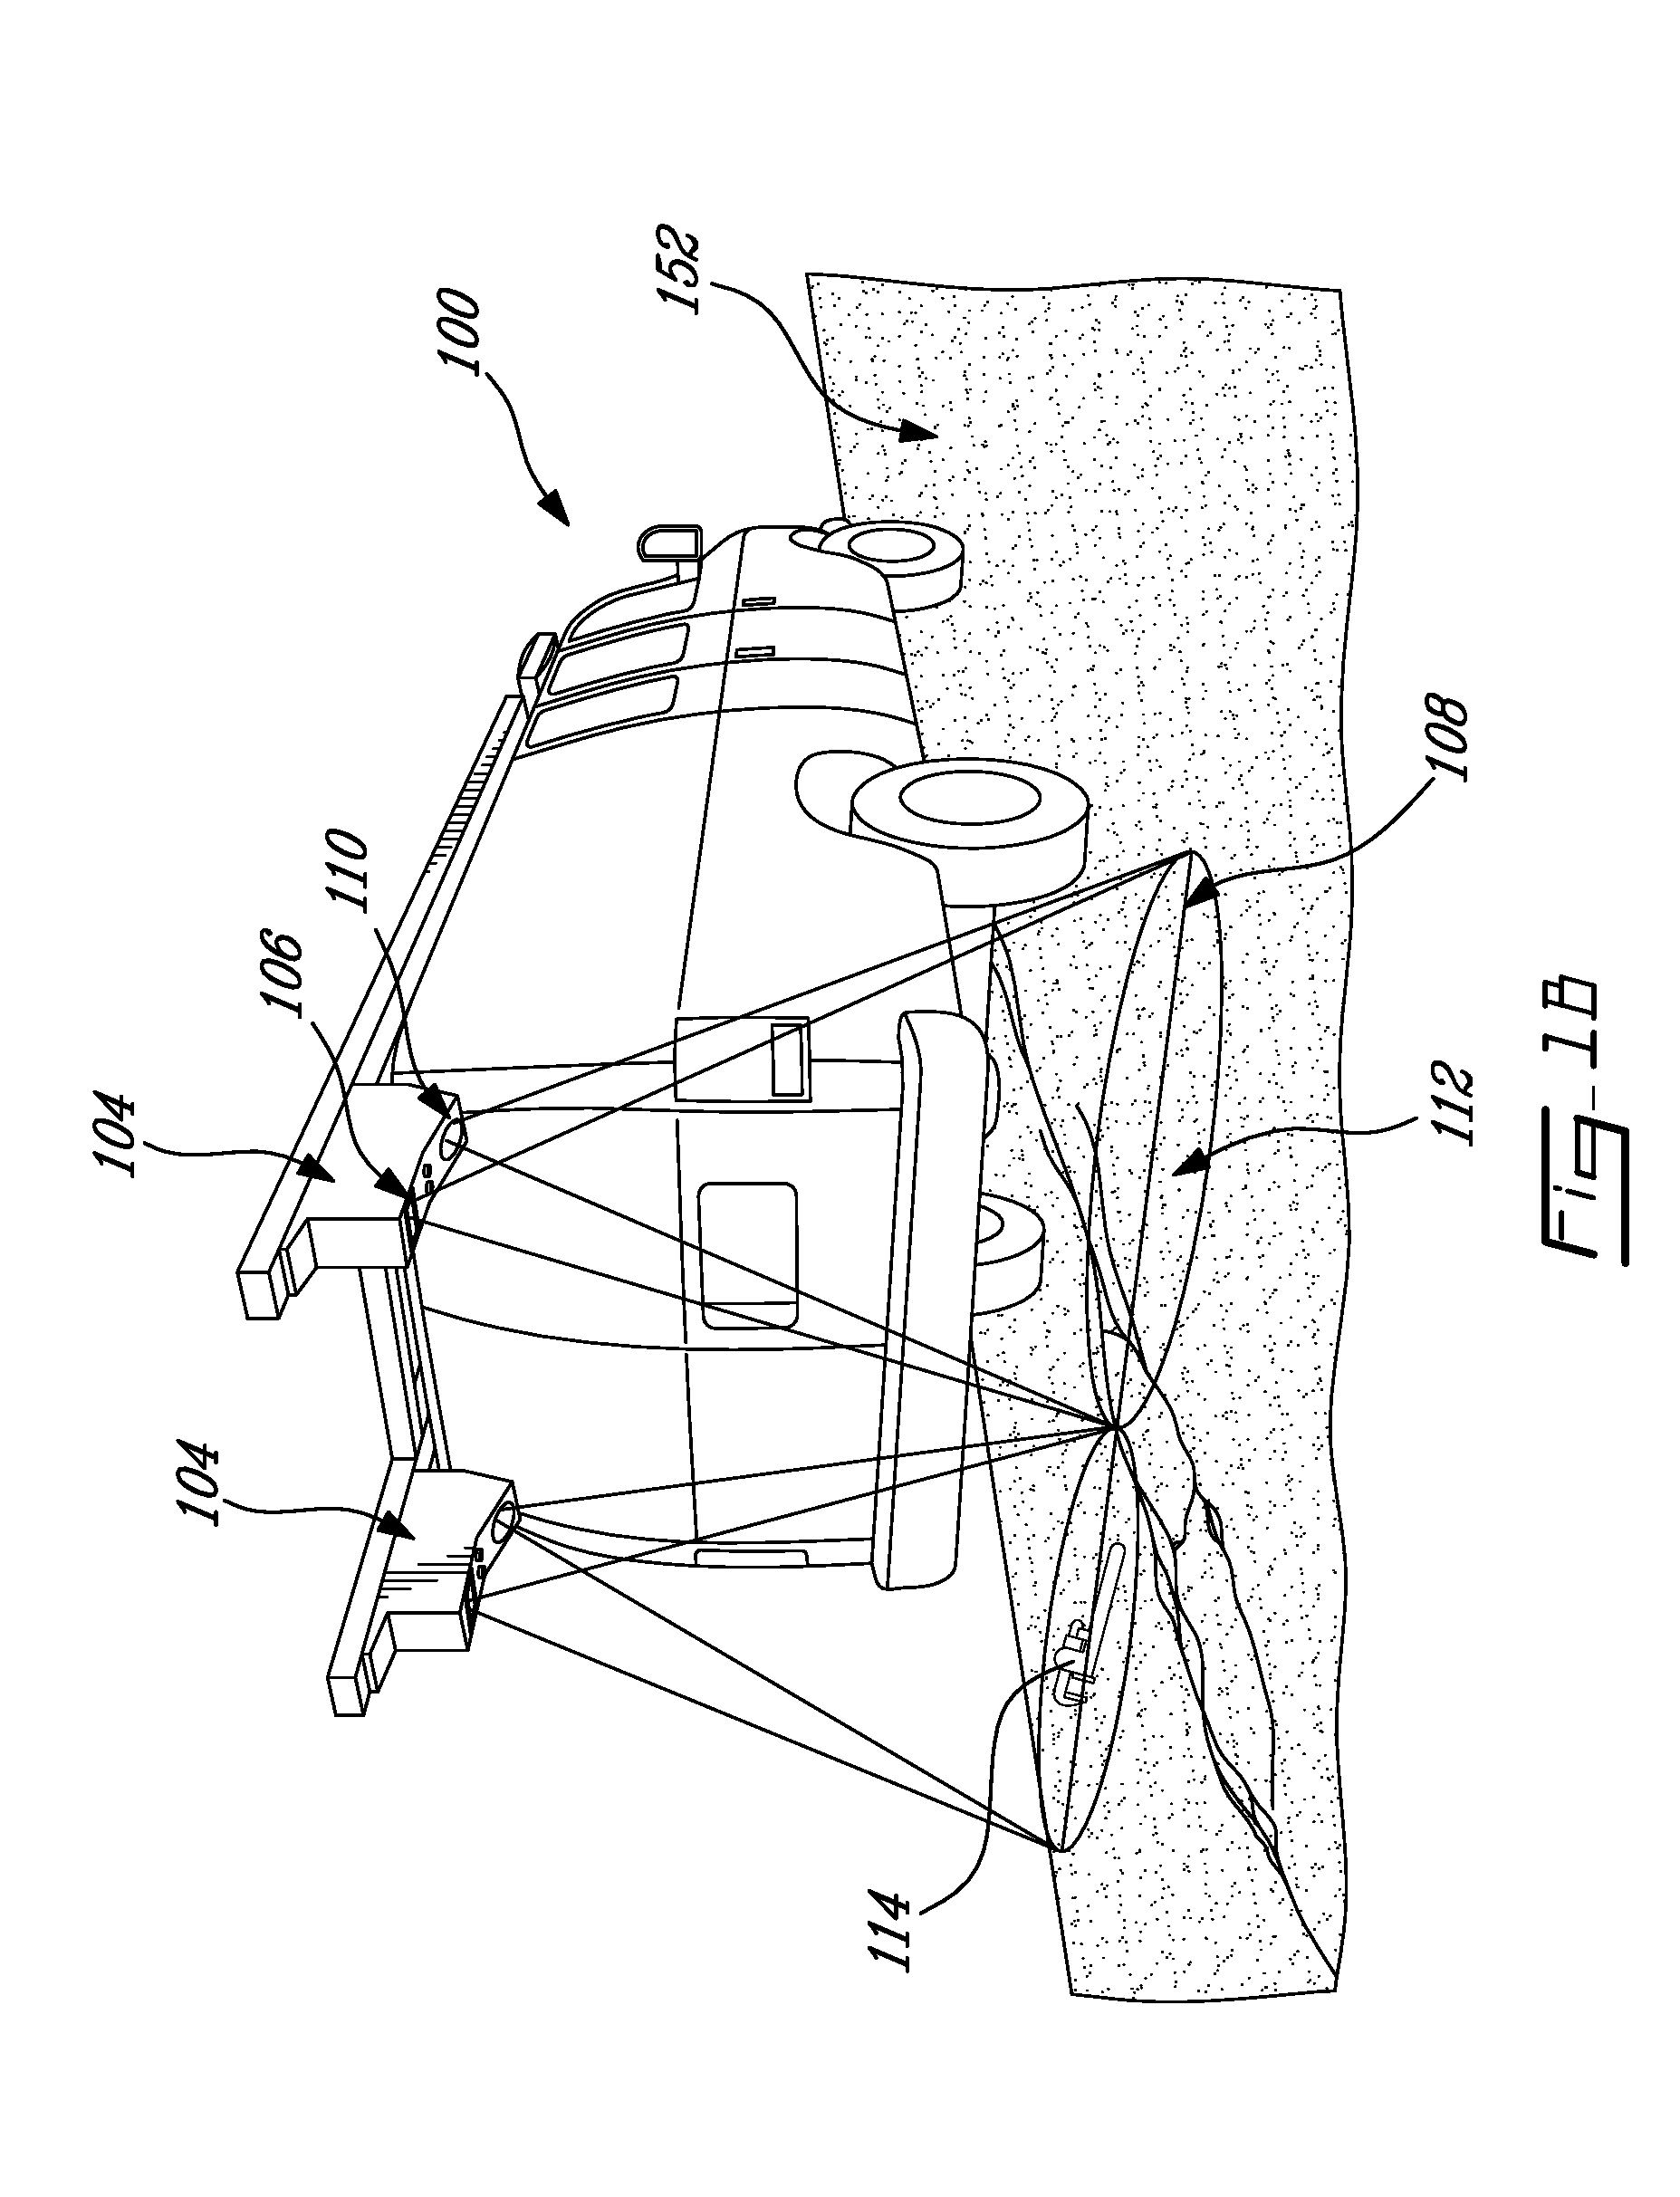 Method and apparatus for detection of foreign object debris